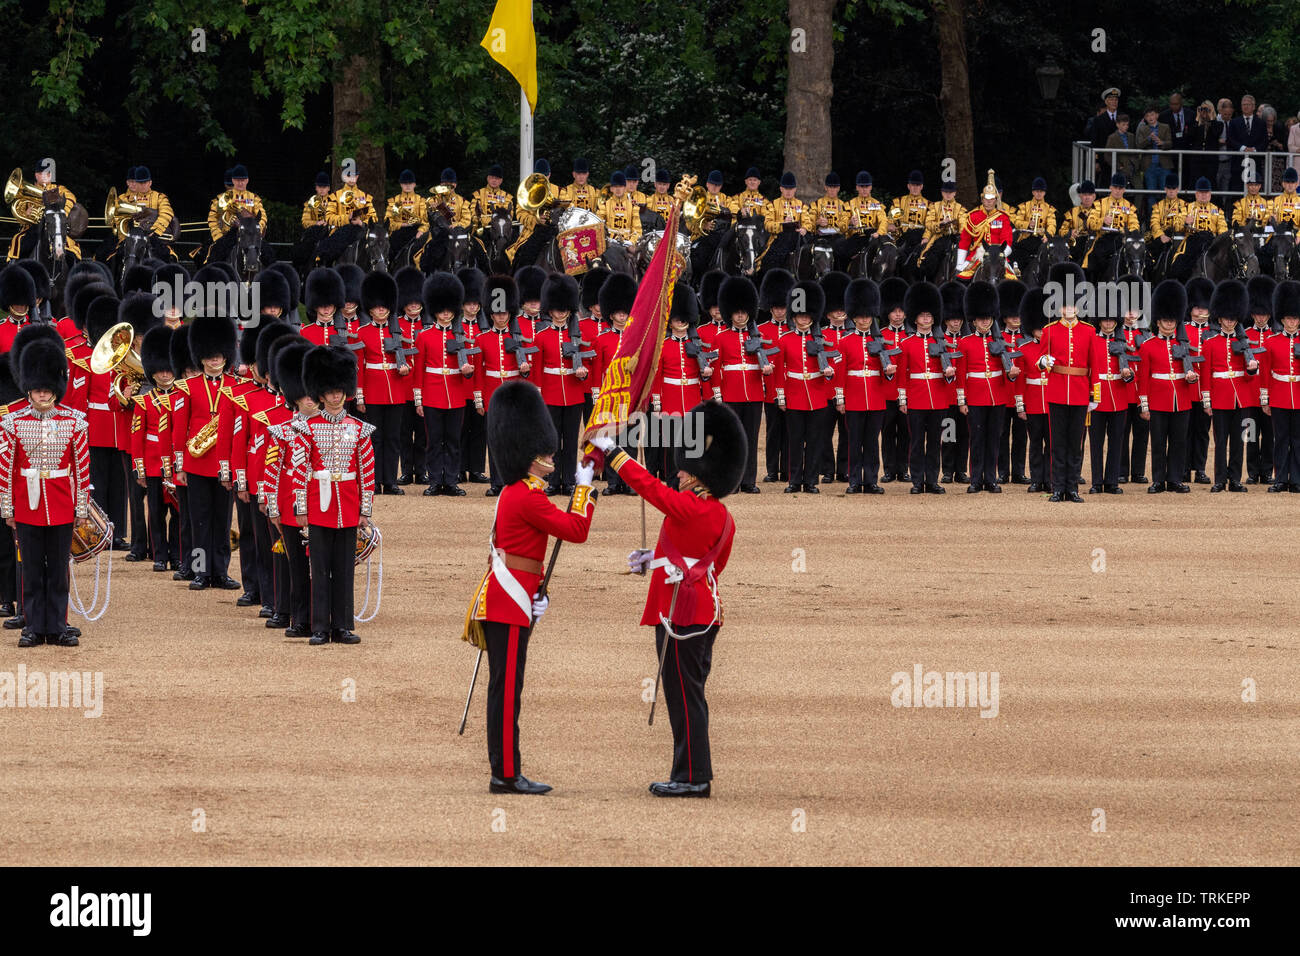 London, UK. 8th June 2019 Trooping the Colour 2019, The Queen's Birthday parade on Horseguards Parade London in the presence of Her Majesty The Queen.  Colour trooped by the 1st Battalion Grenadier Guards The Colours are transferred to the Ensign prior to trooping Credit Ian Davidson/Alamy Live News Stock Photo